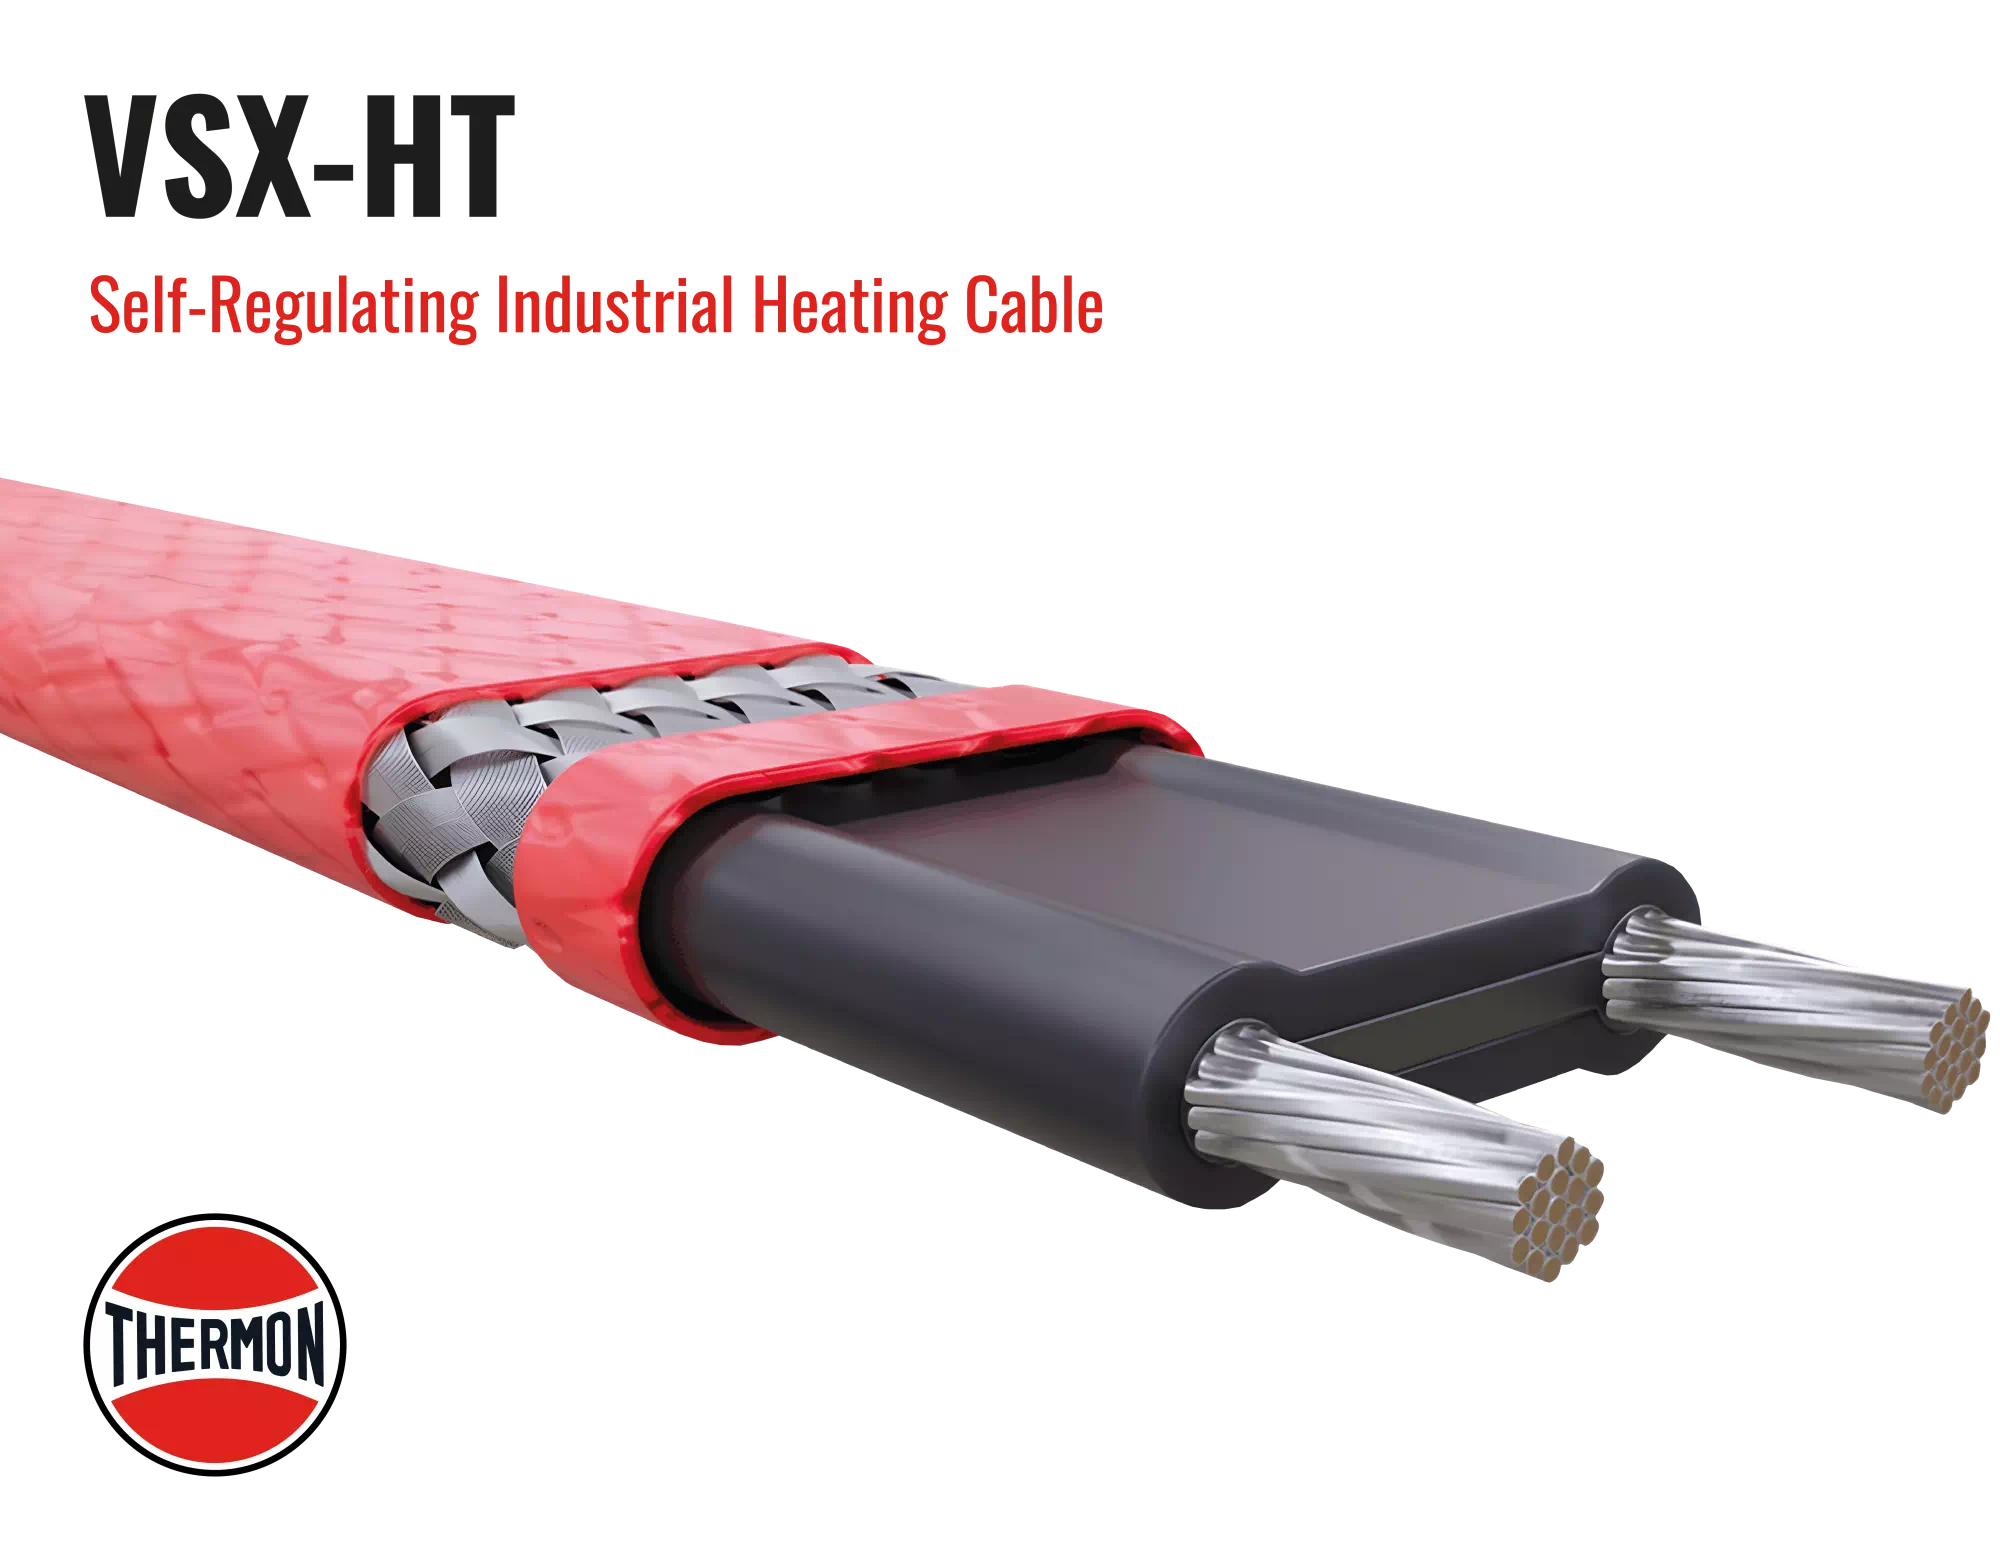 Thermon VSX-HT-Self-Regulating-Heat-Cable